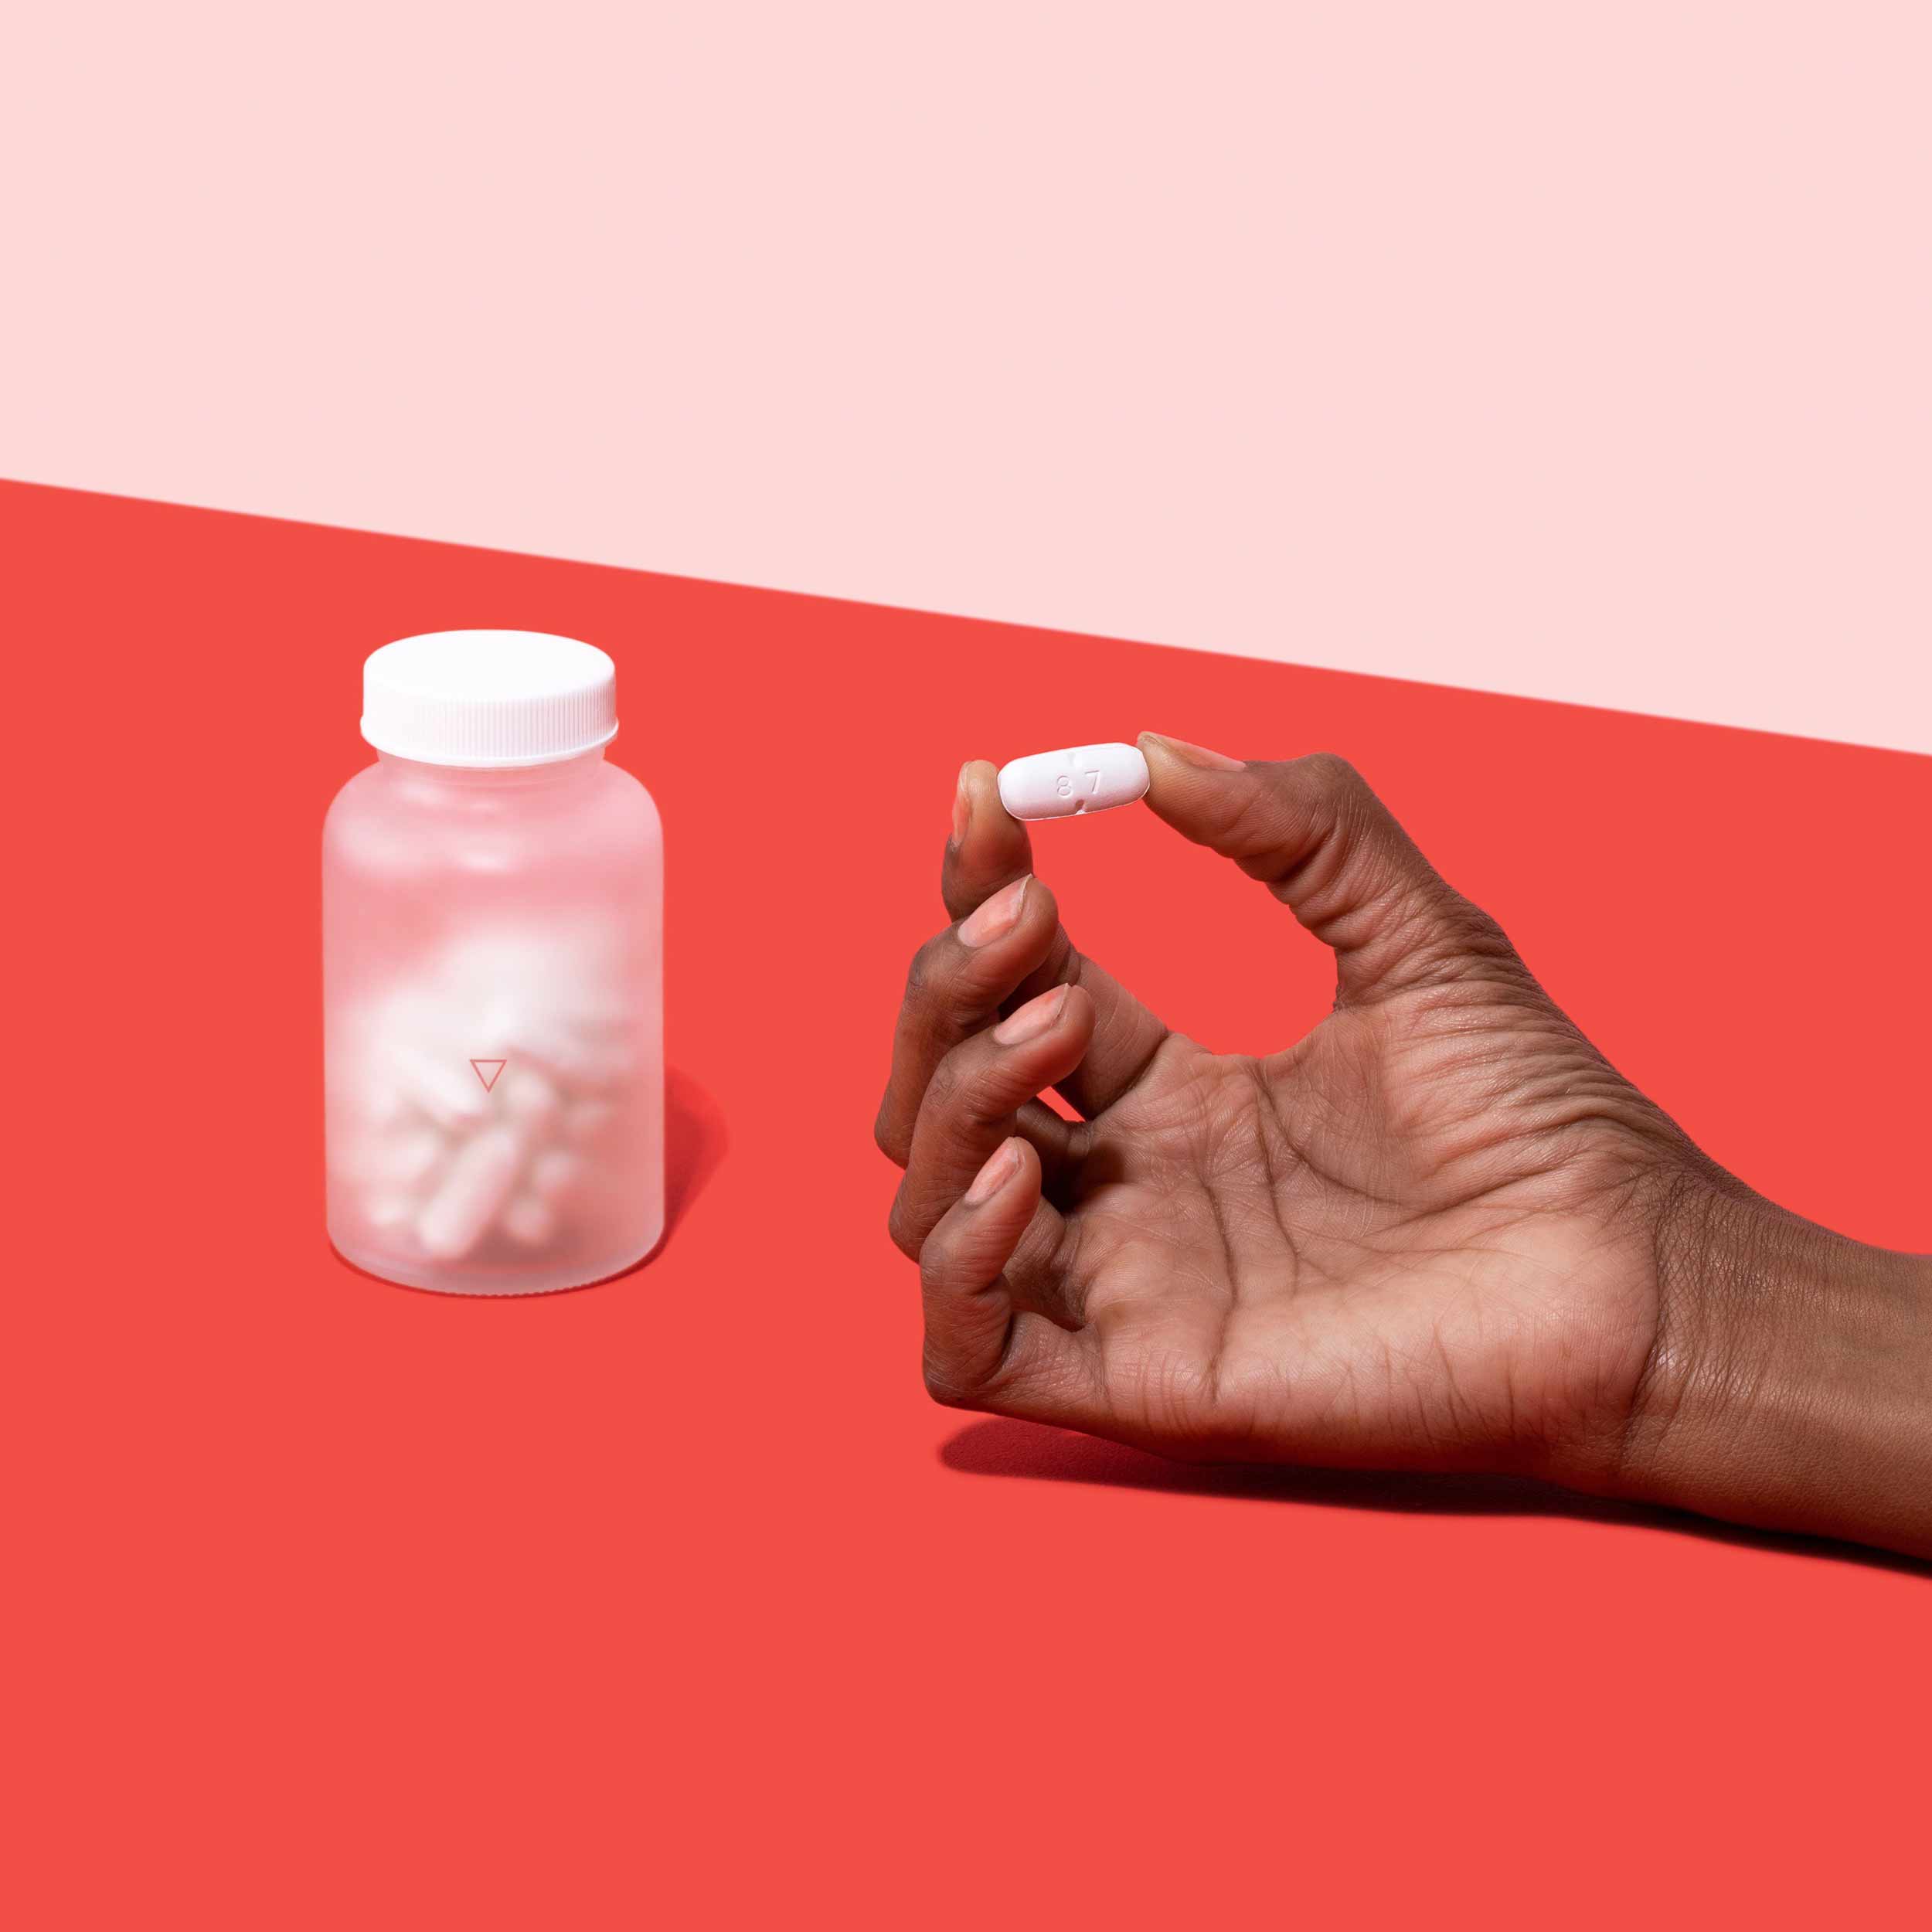 Female hand holding Valacyclovir tablet next to bottle of Valacyclovir on a red surface, on a pink background